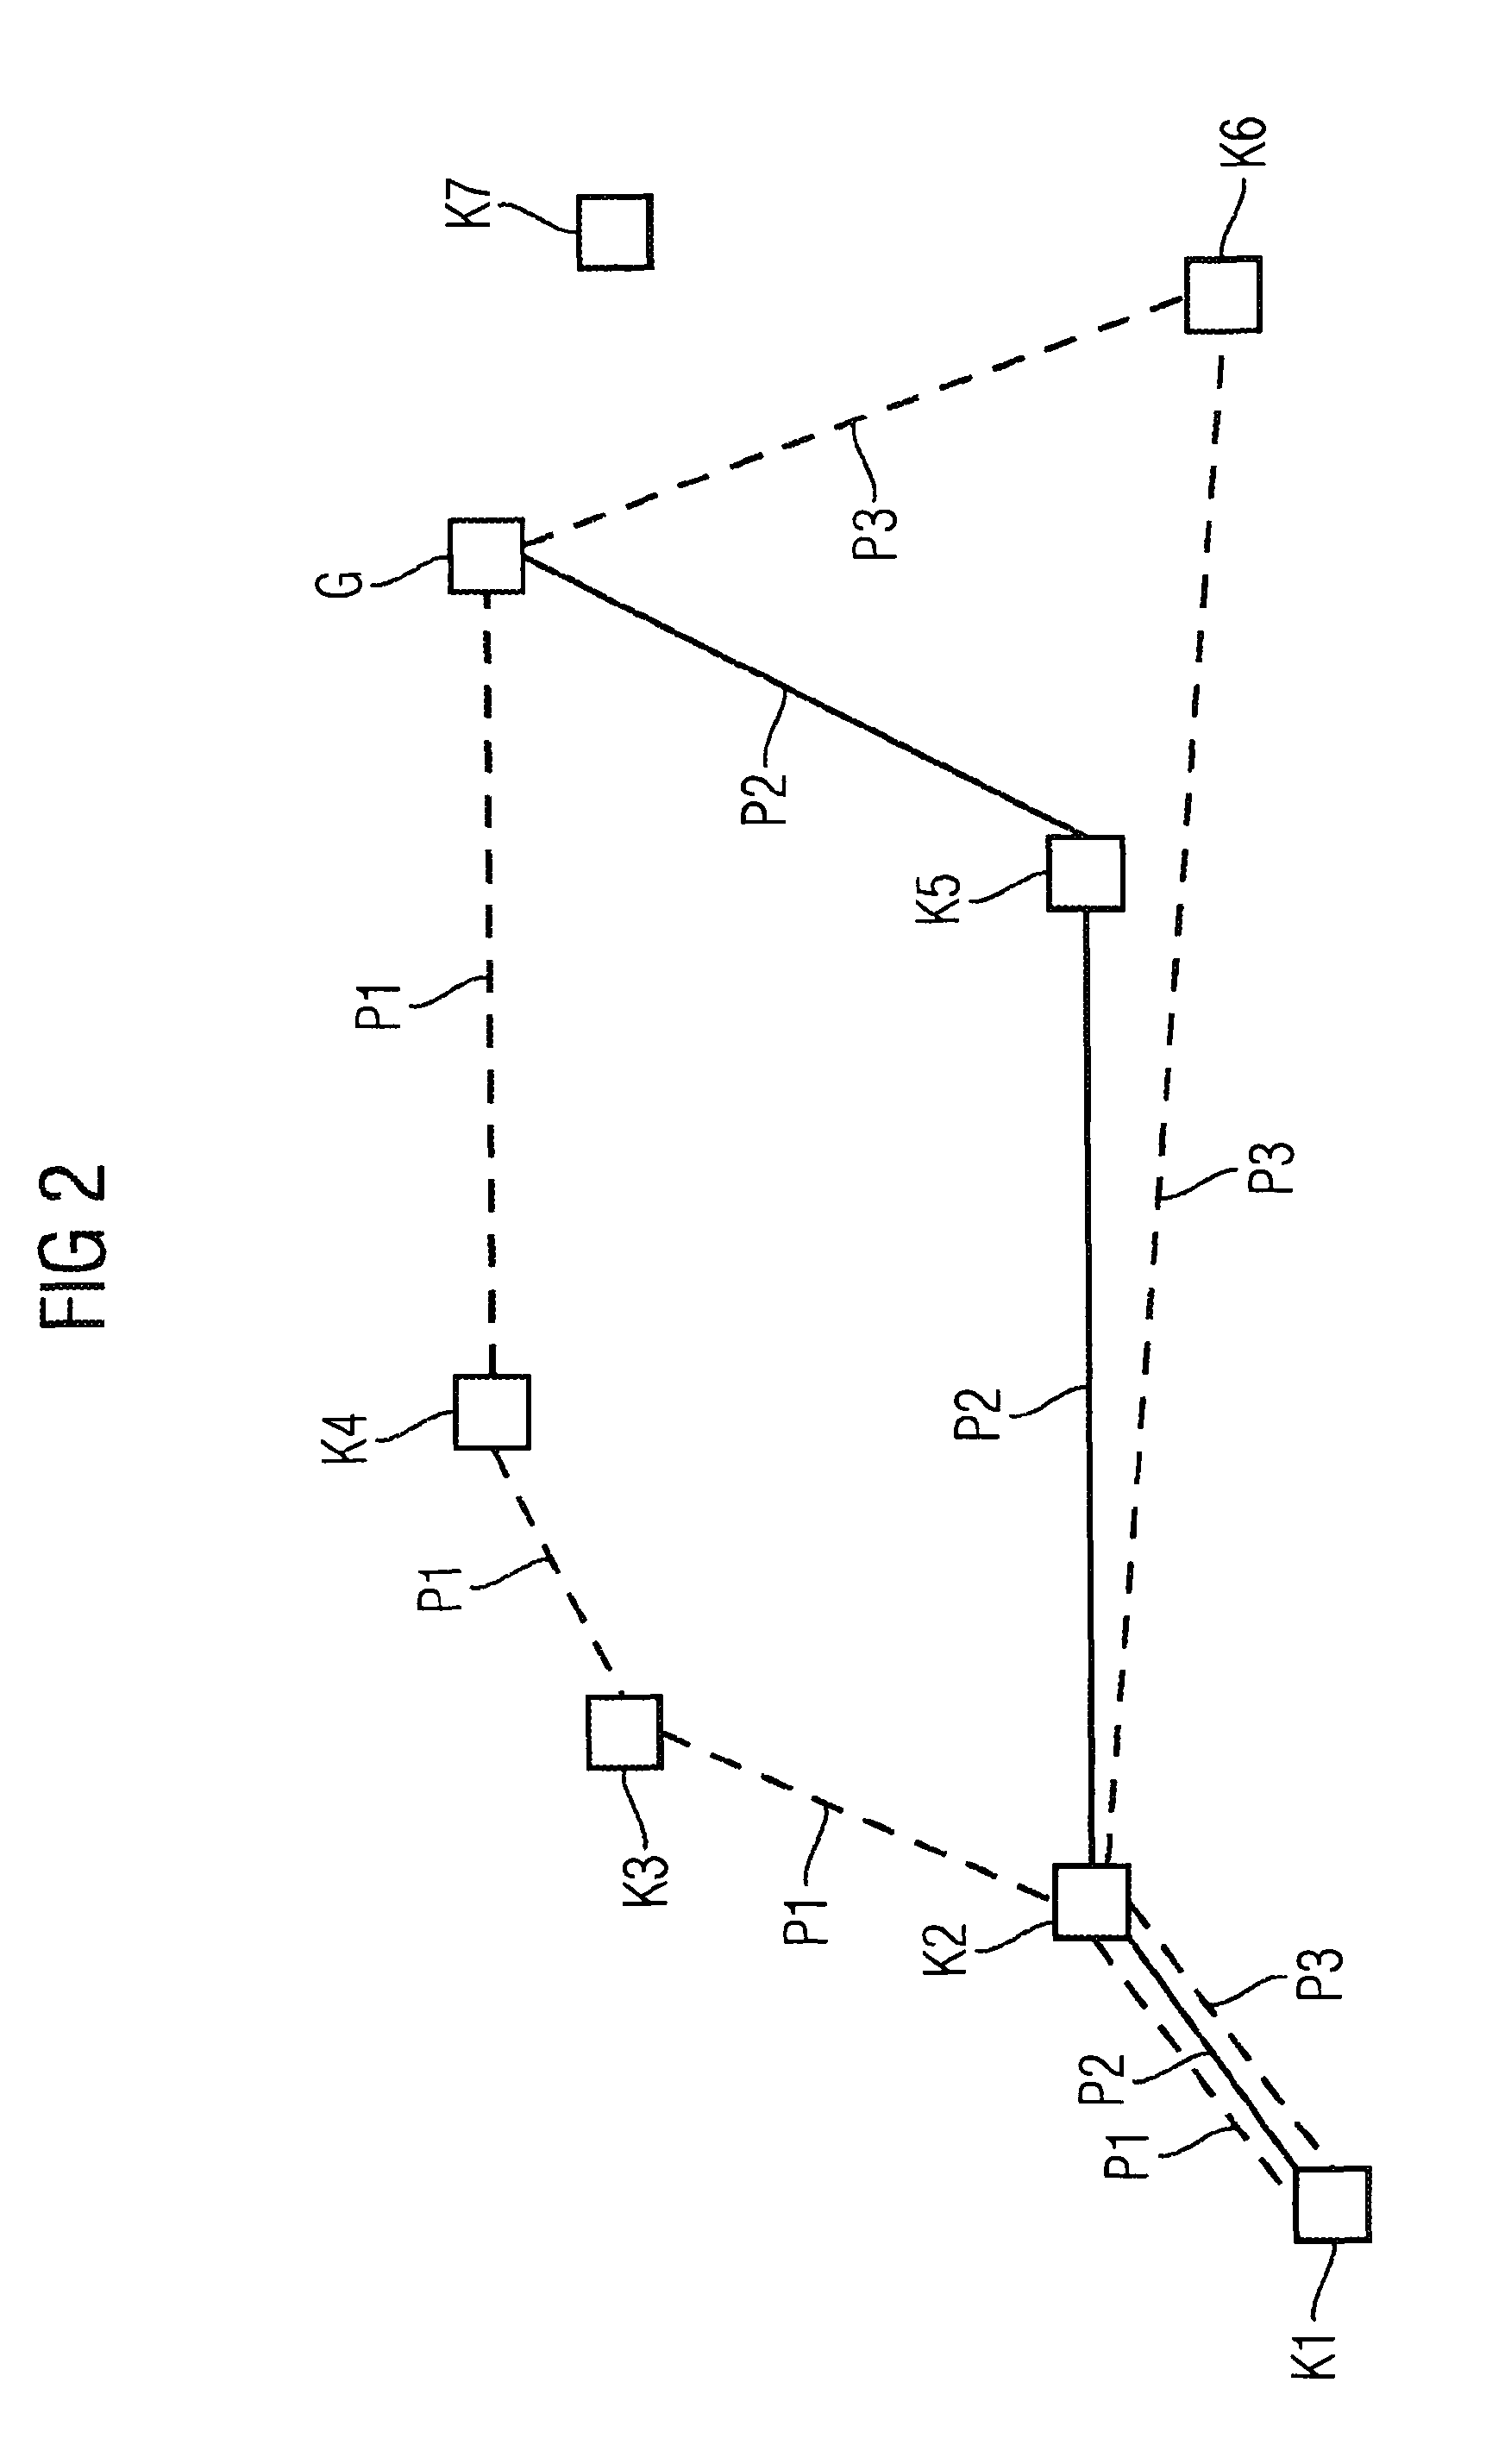 Method for determining a route distance value